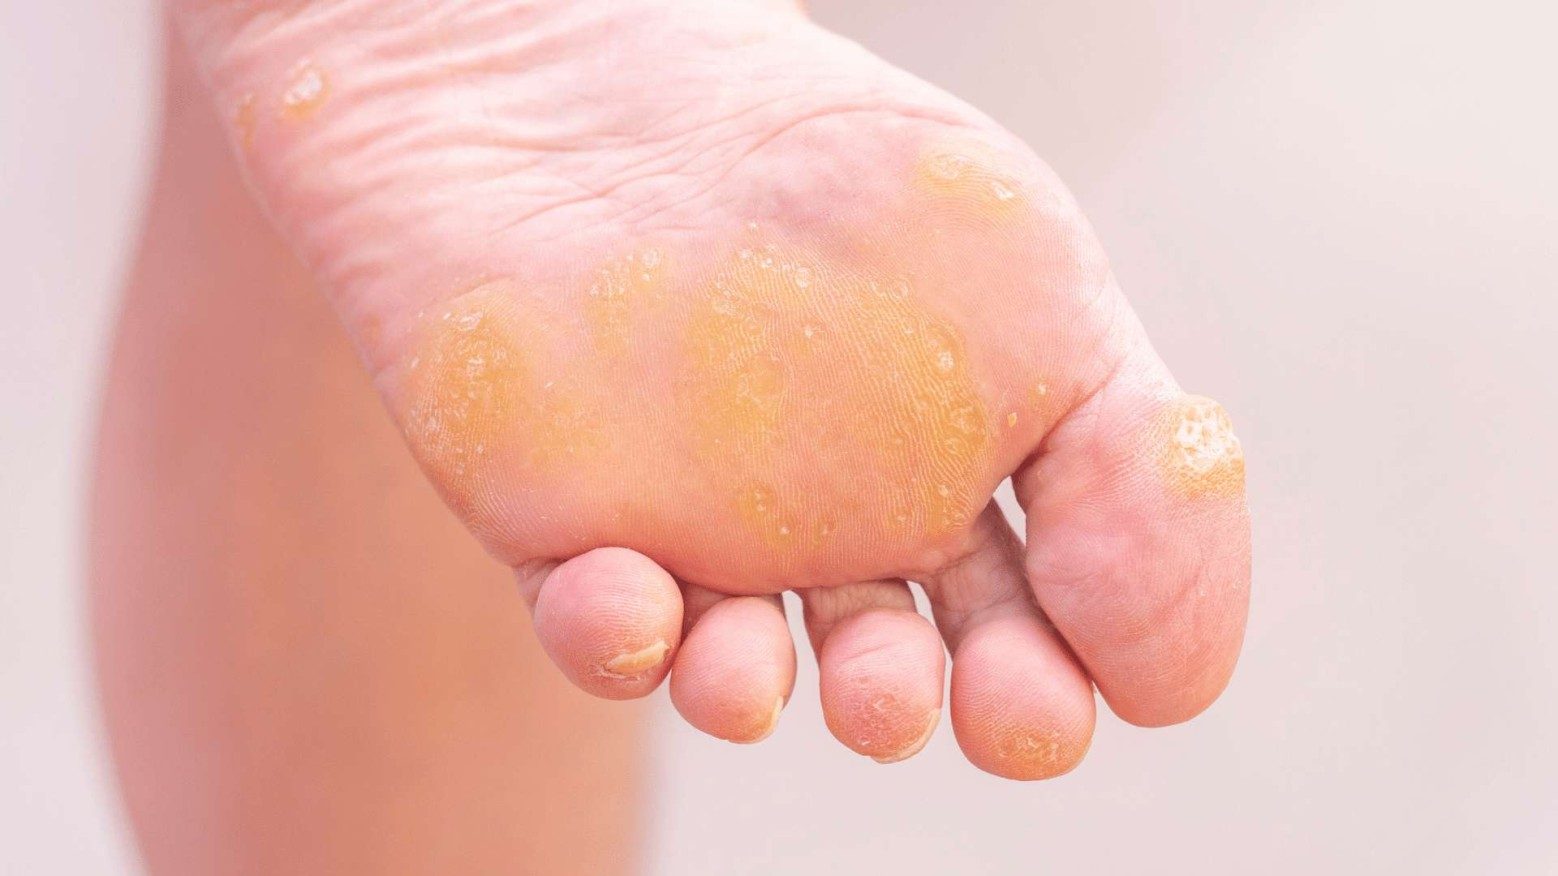 Blisters, Corns and Calluses